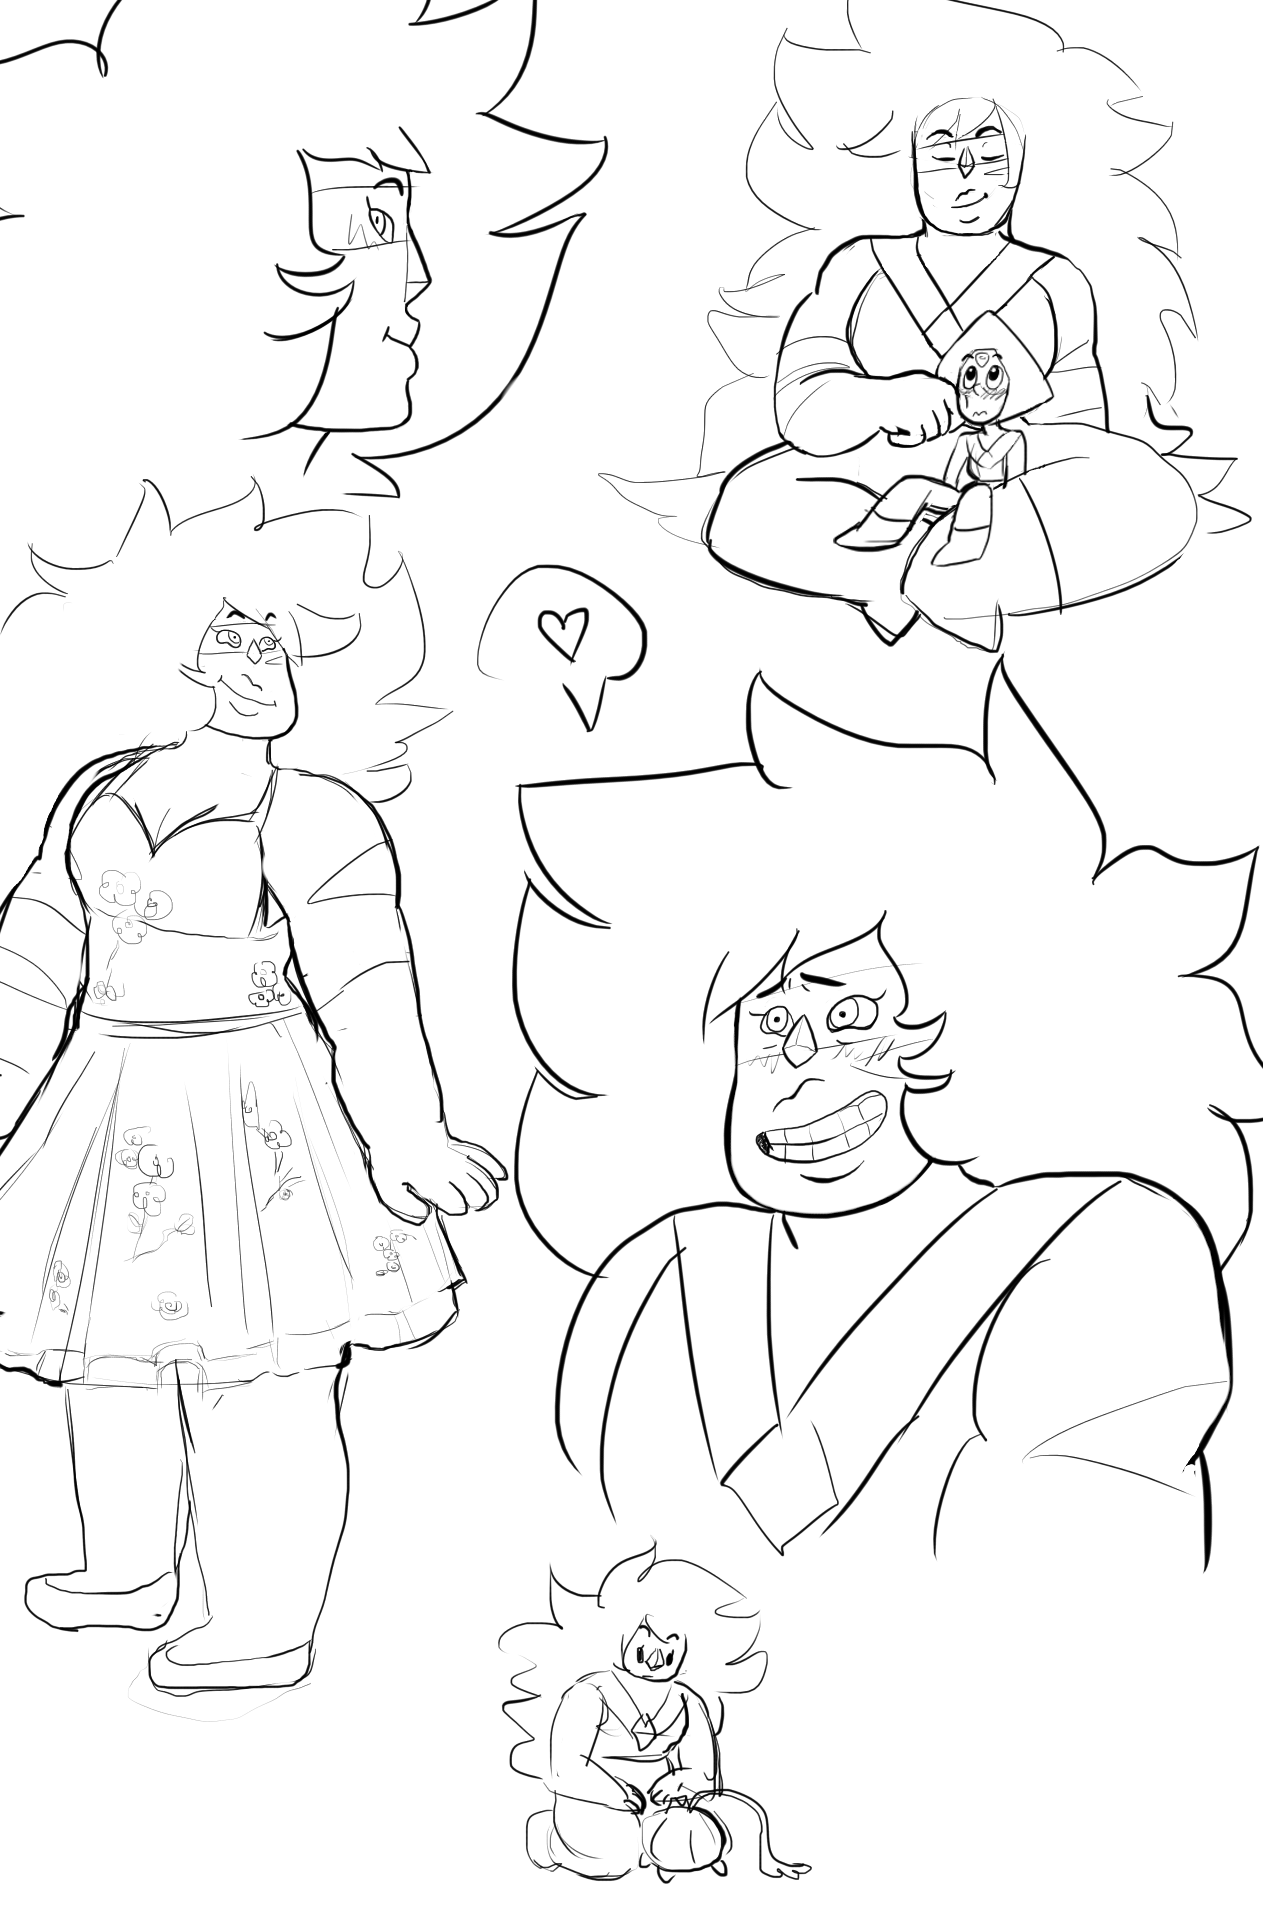 some happy jaspers for warmup, and a bonus jaspidot doodle in the top right hehe i’ll probably line/color some of these eventually